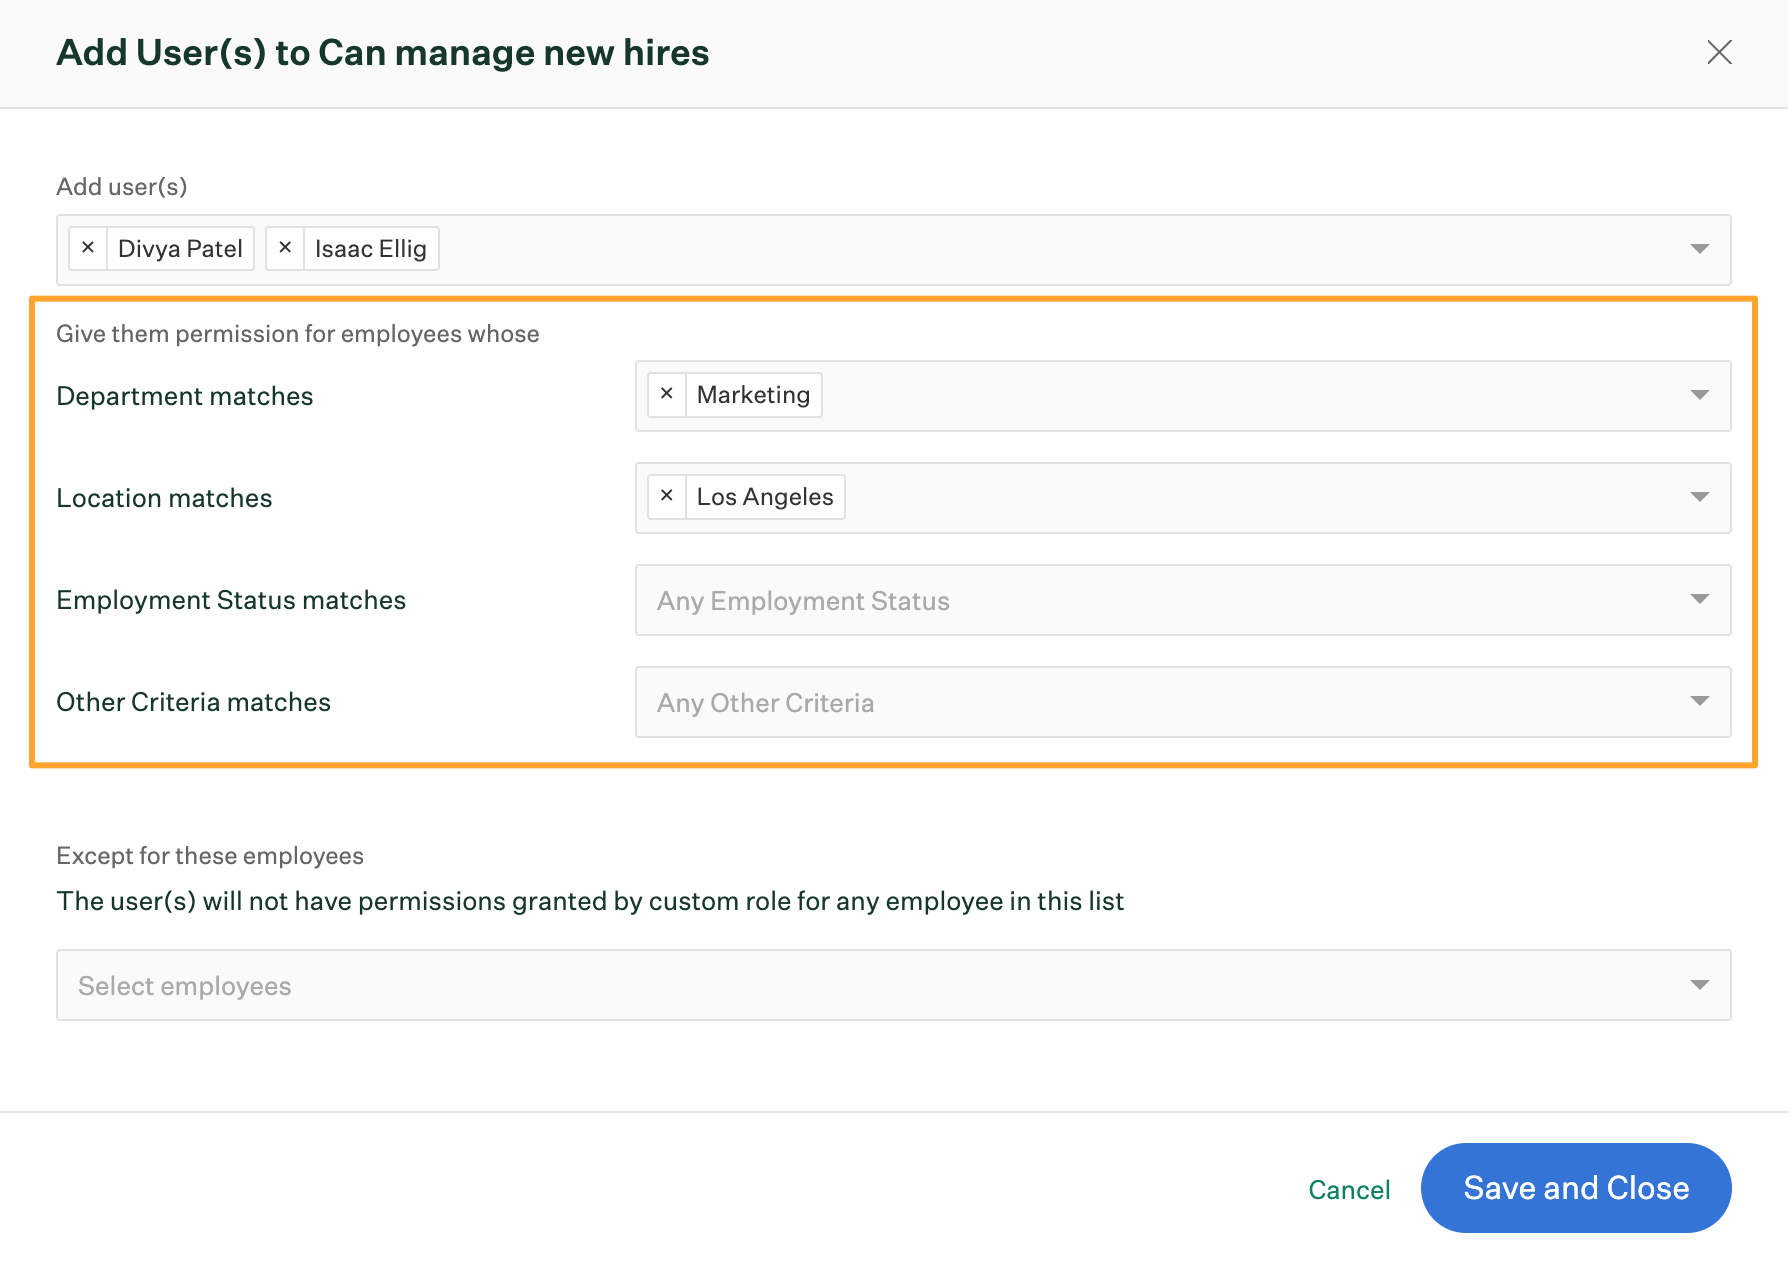 Adding two users to new custom role for managing new hires with match rules for Markting department and Los Angeles location filled out